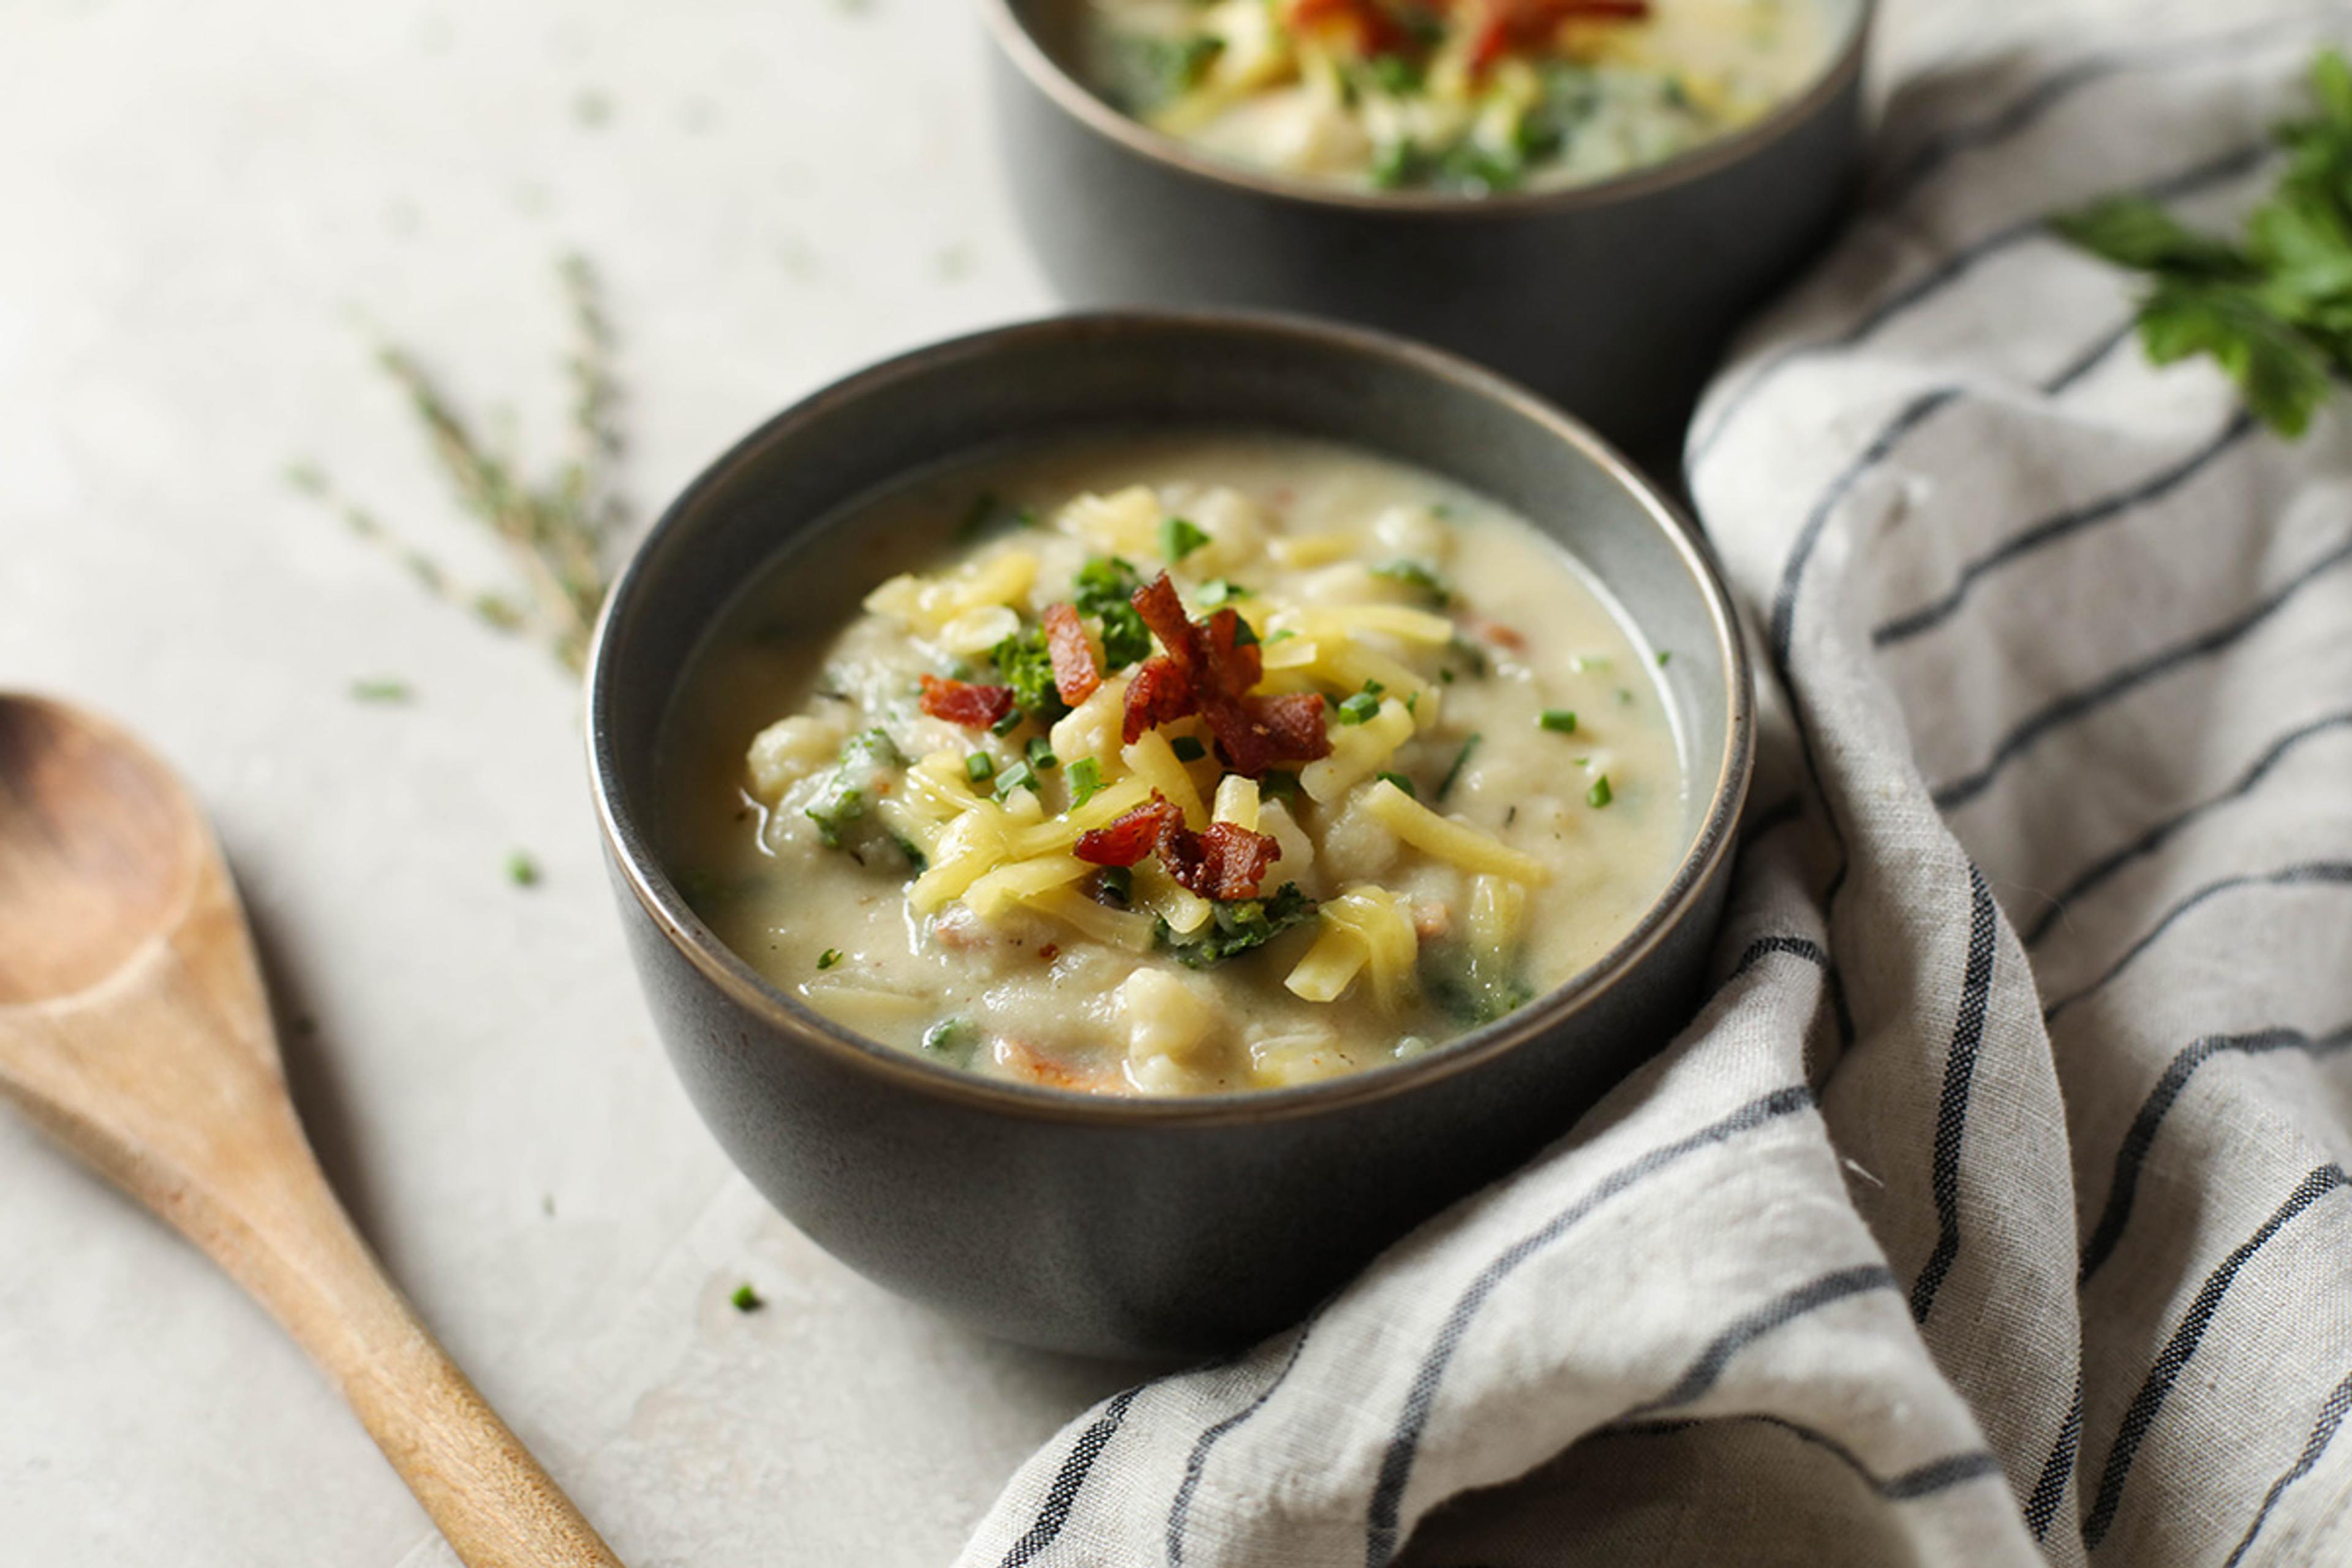  Loaded cheesy cauliflower soup topped with chives, shredded cheese, and bacon crumbles.